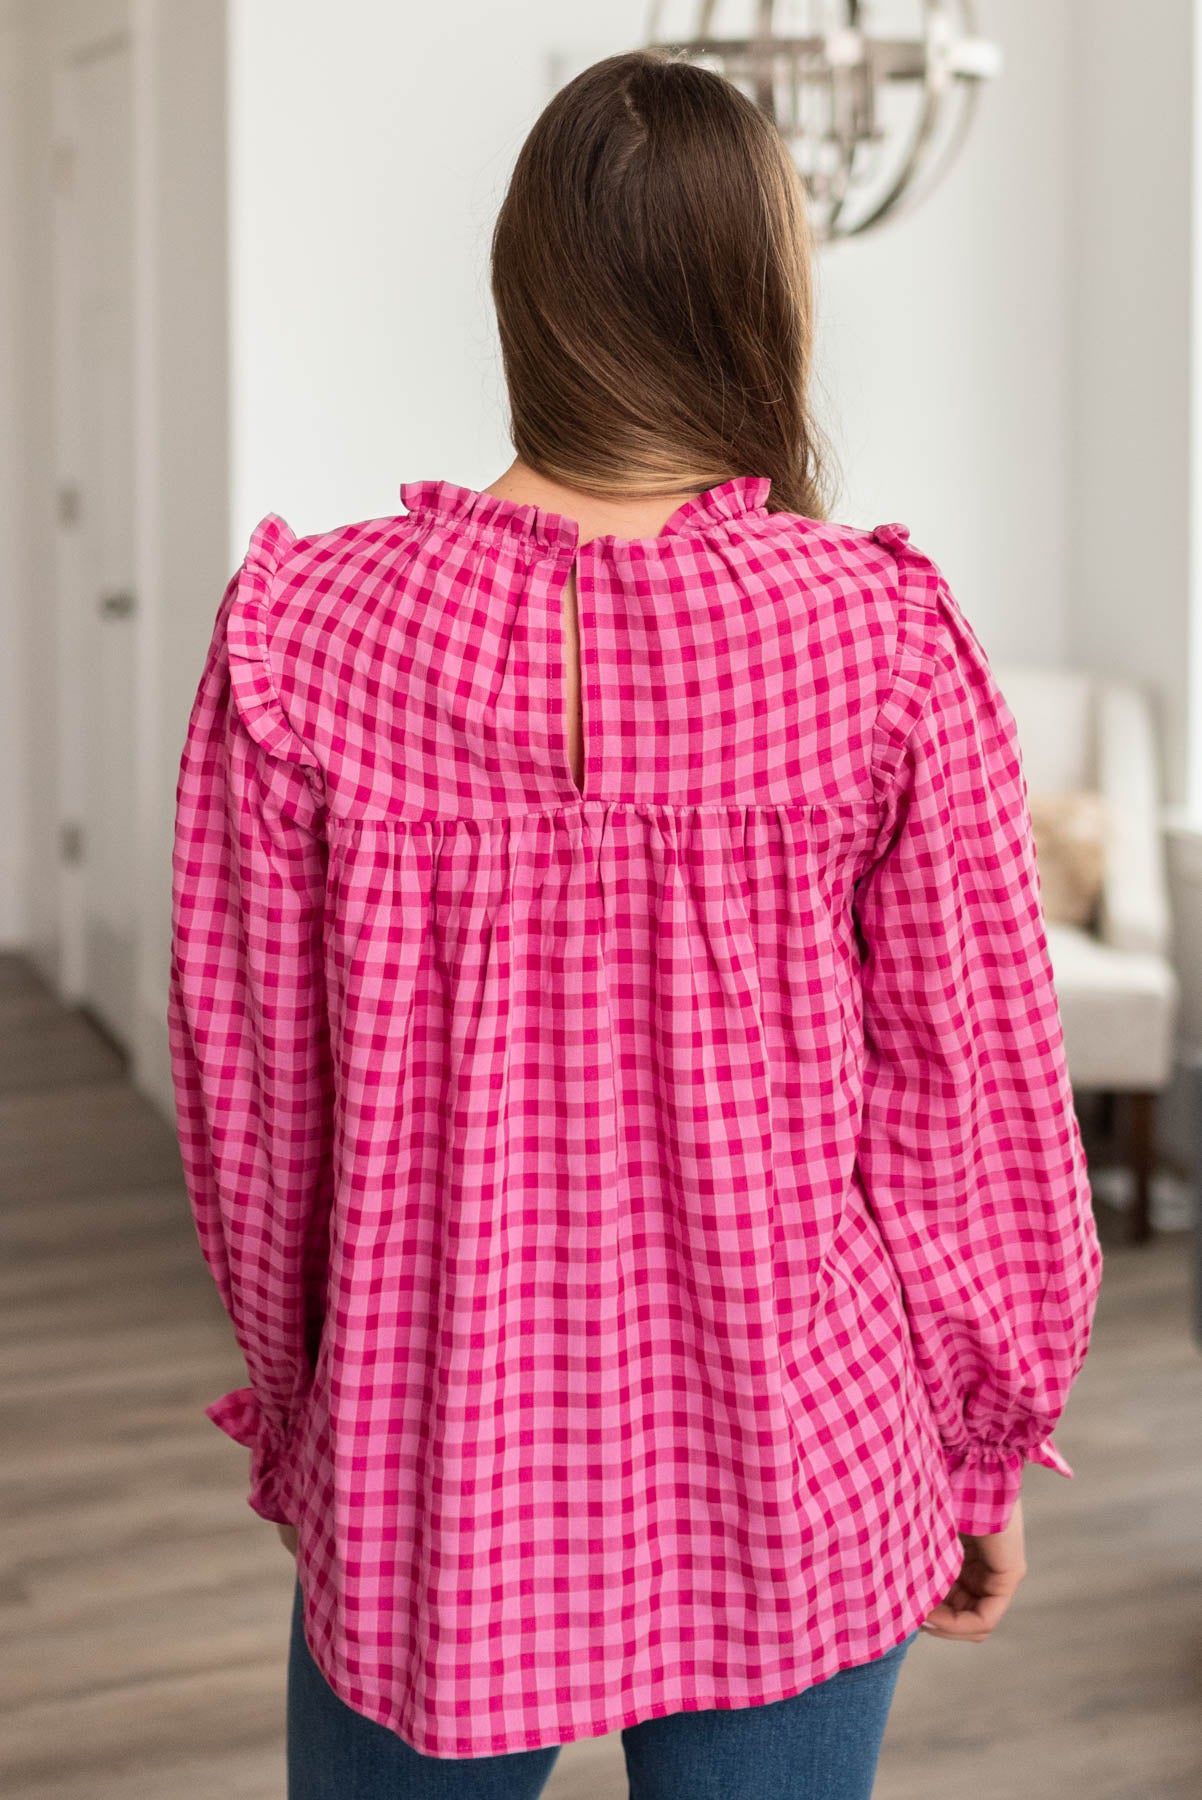 Back view of the pink fuchsia ruffle blouse with back closer